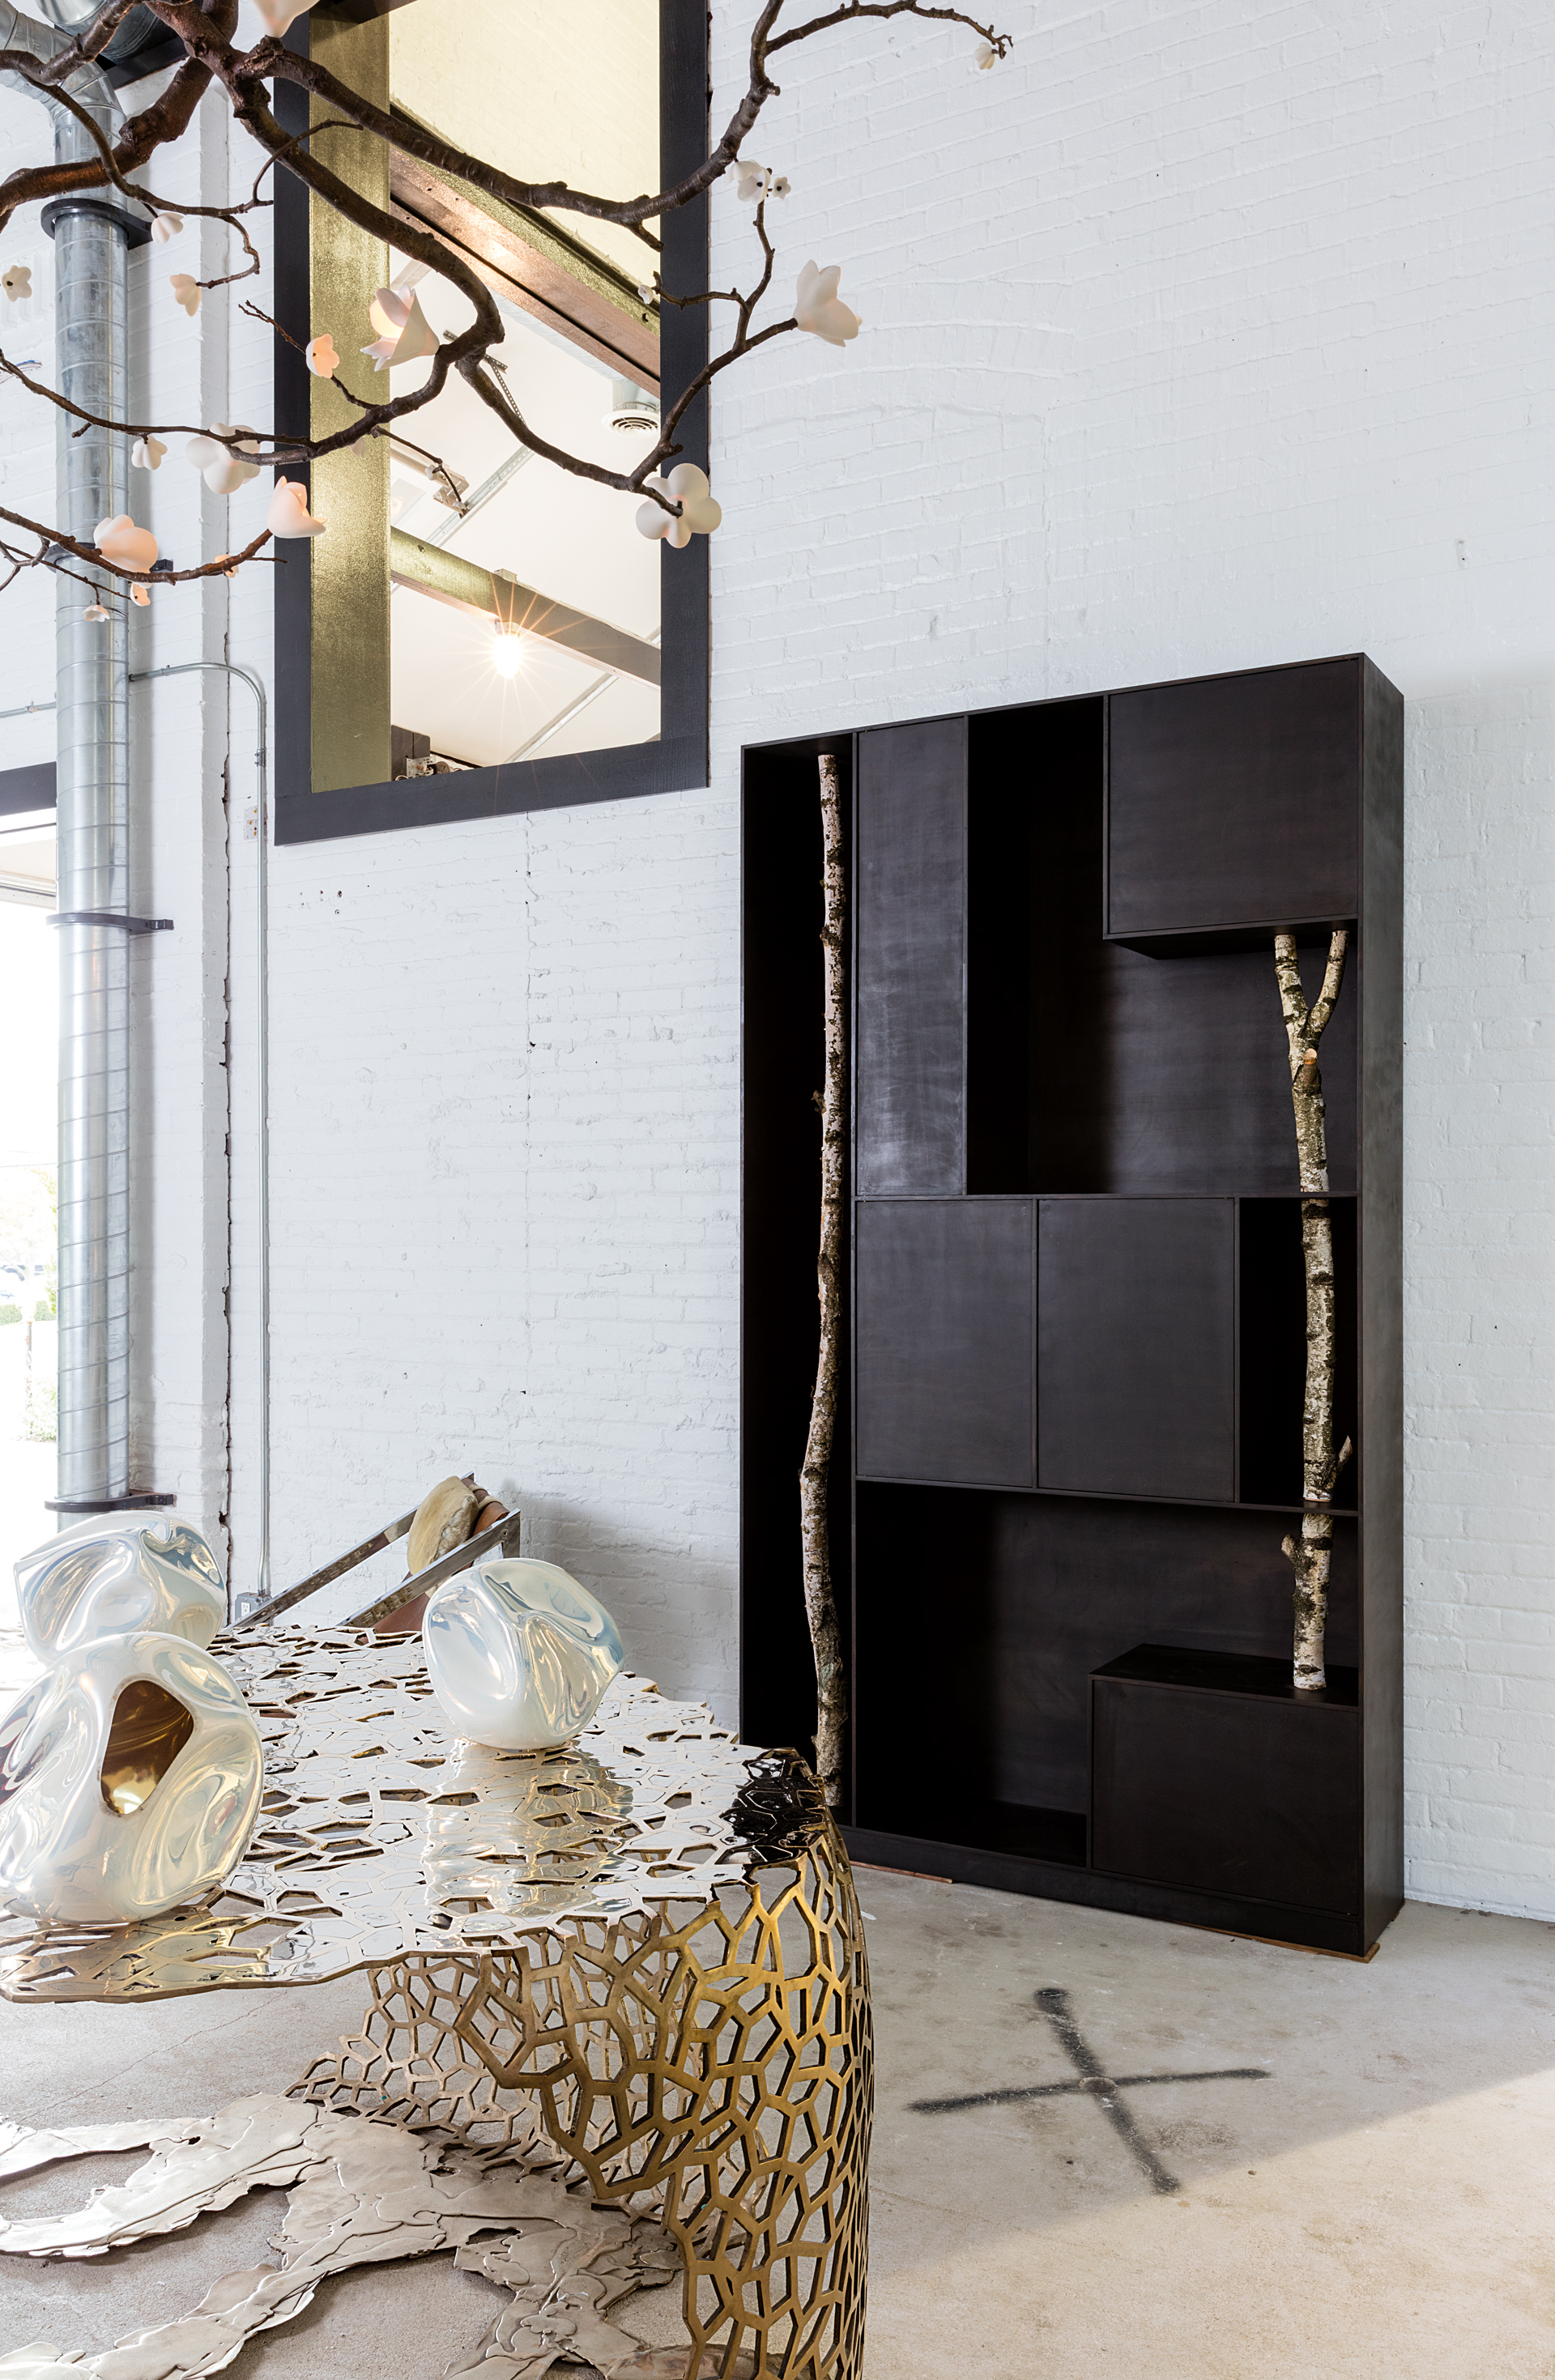 A cabinet by the Italian architect Andrea Branzi is next to a 2015 lace-like bronze table by the American designer David Wiseman.